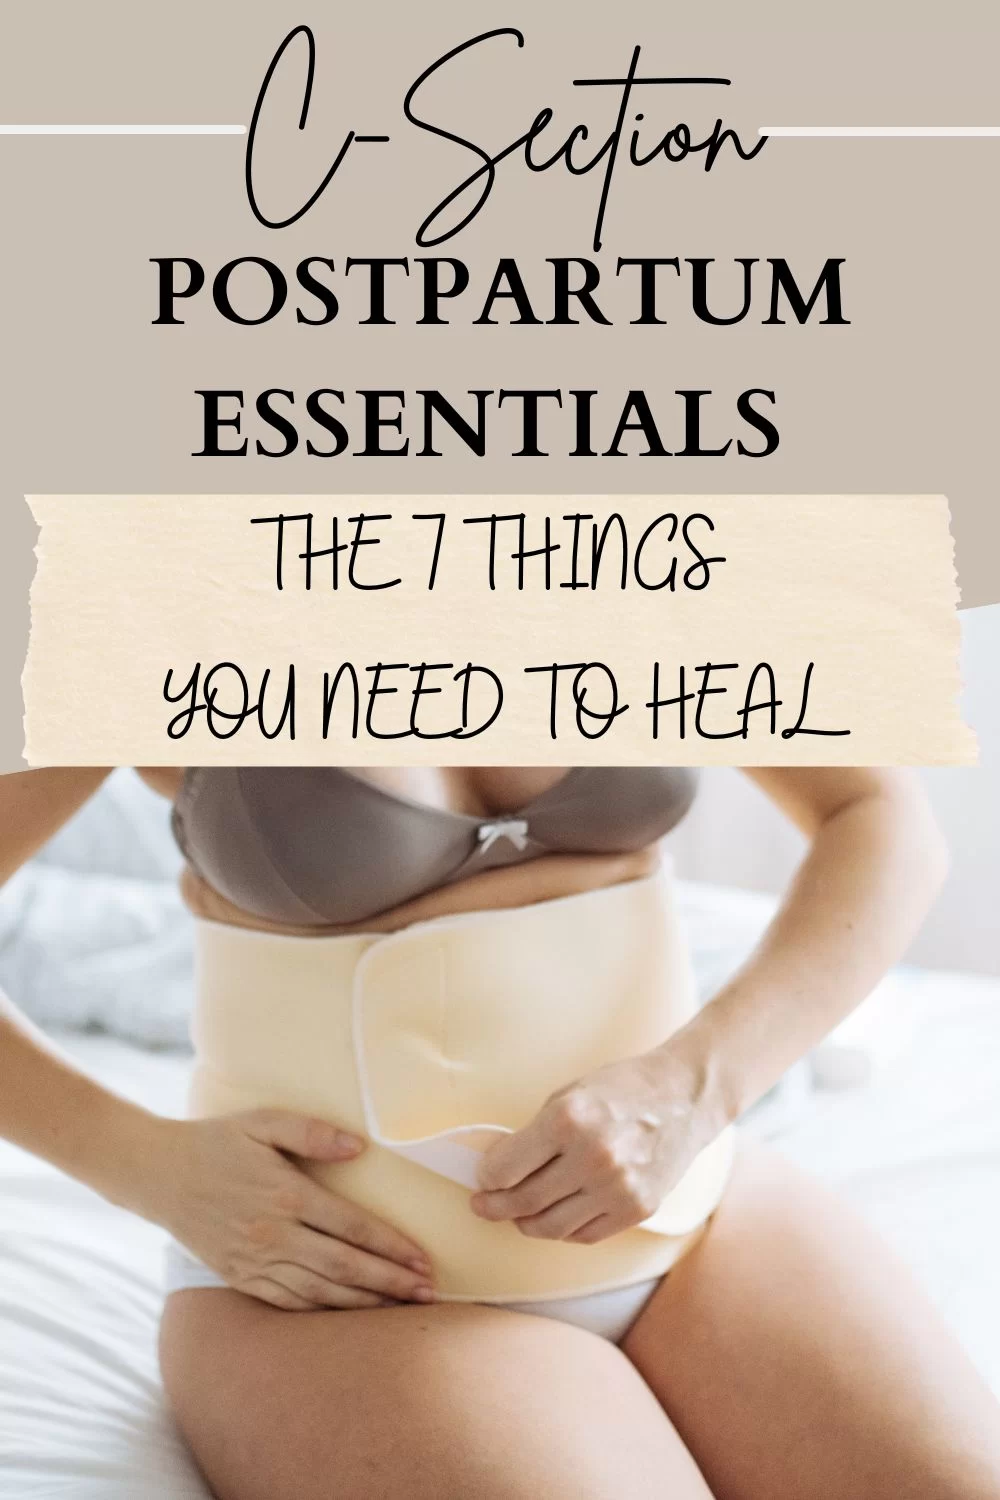 woman sitting on bed in underwear, putting a belly wrap around her core with text "C-section postpartum essentials: The 7 things you need to heal"